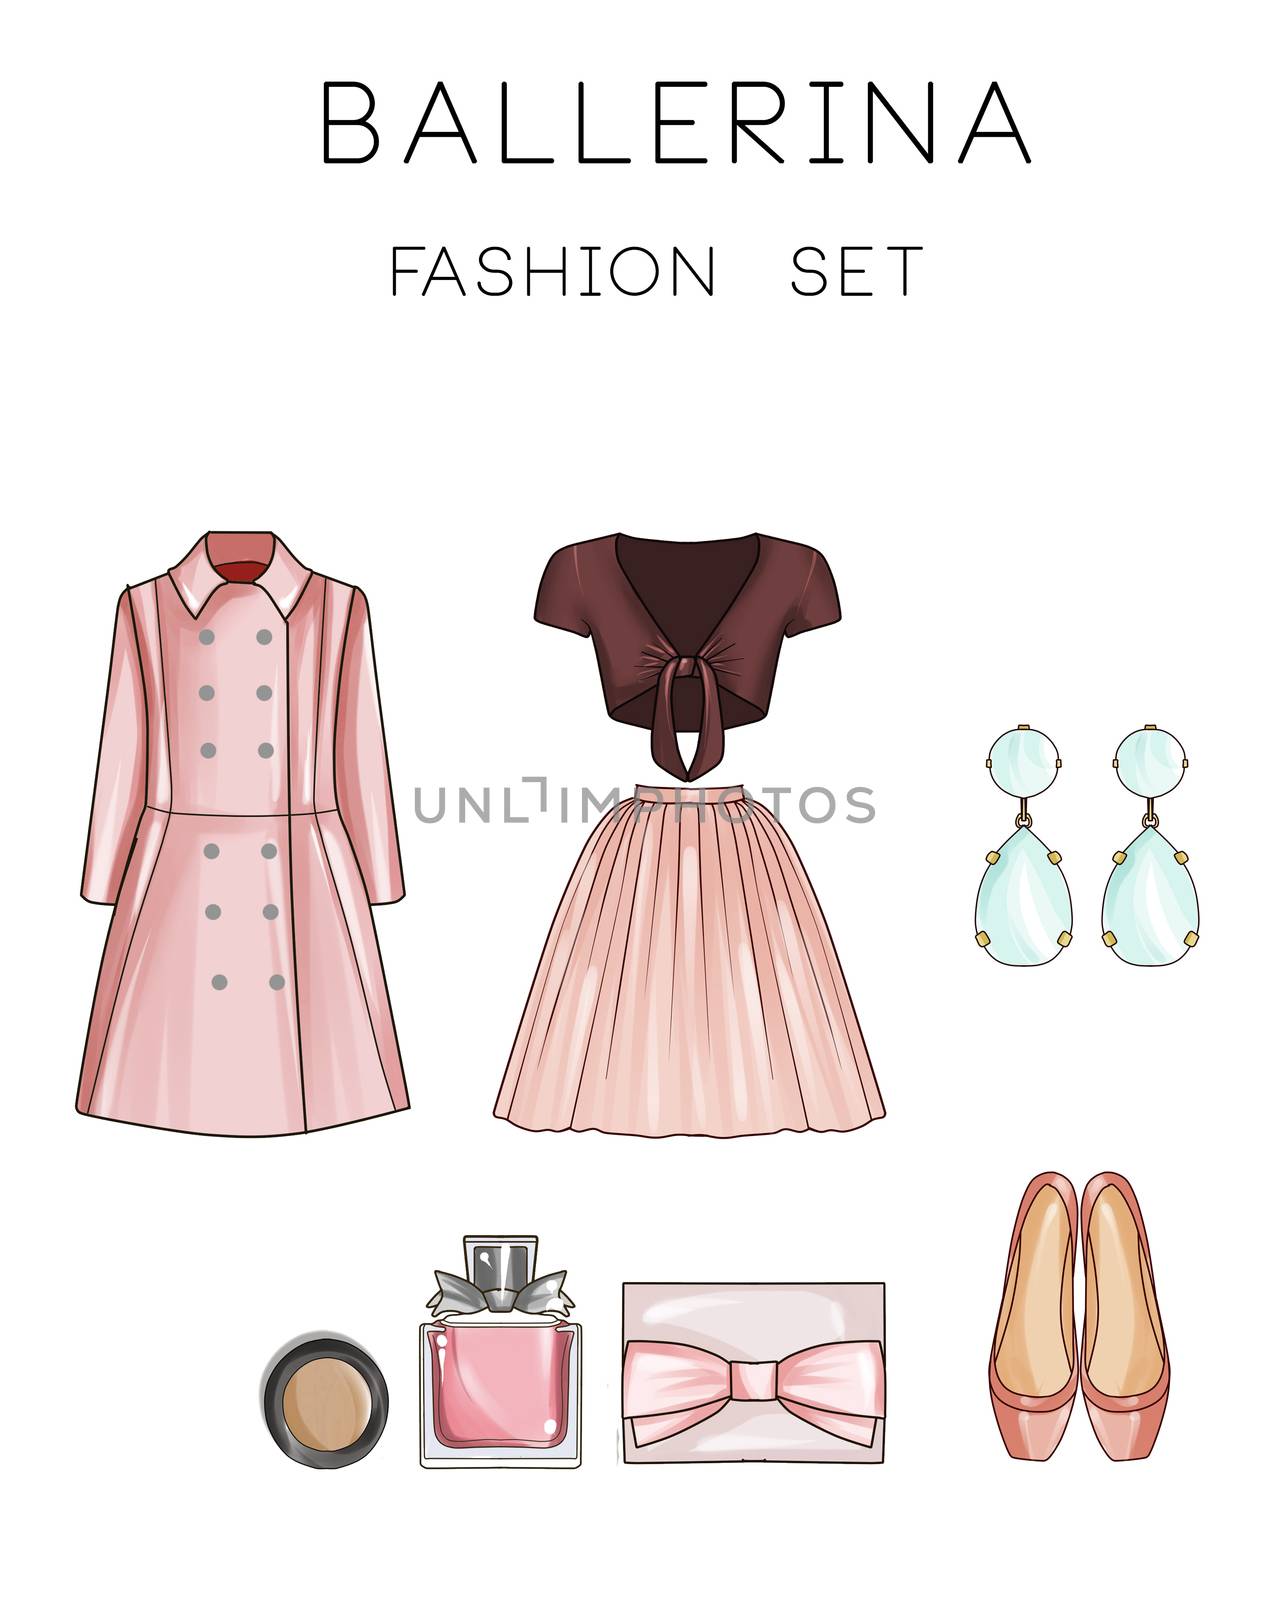 Fashion set of woman's clothes and accessories - Coat, Ballerina skirt, top, make up, flat shoes, diamond earrings by GGillustrations